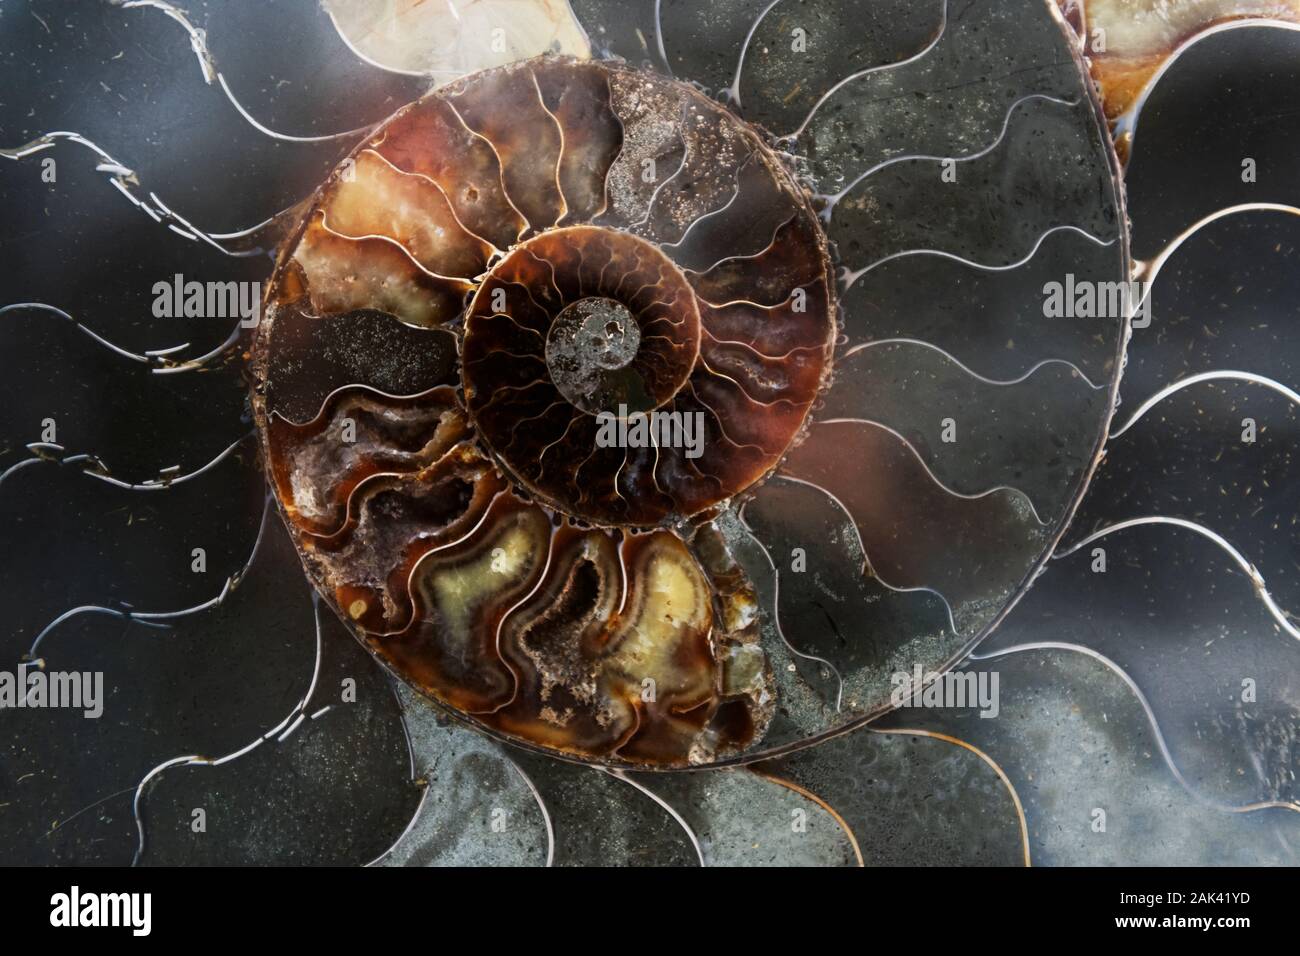 Detail of a fossilized ammonite from the Sahara desert in Morocco. Stock Photo